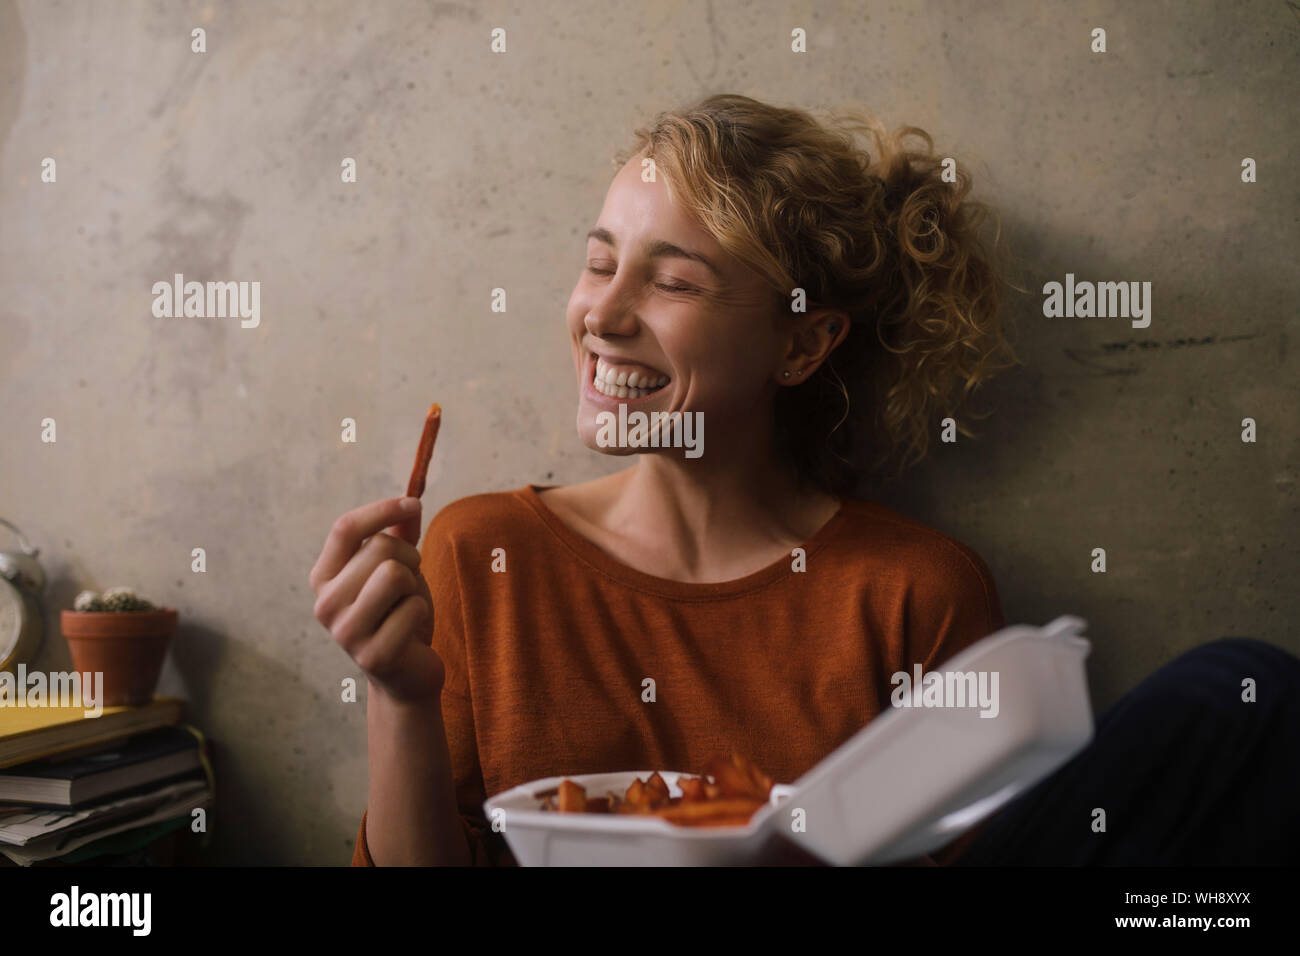 Portrait of grinning young woman eating French Fries at home Stock Photo